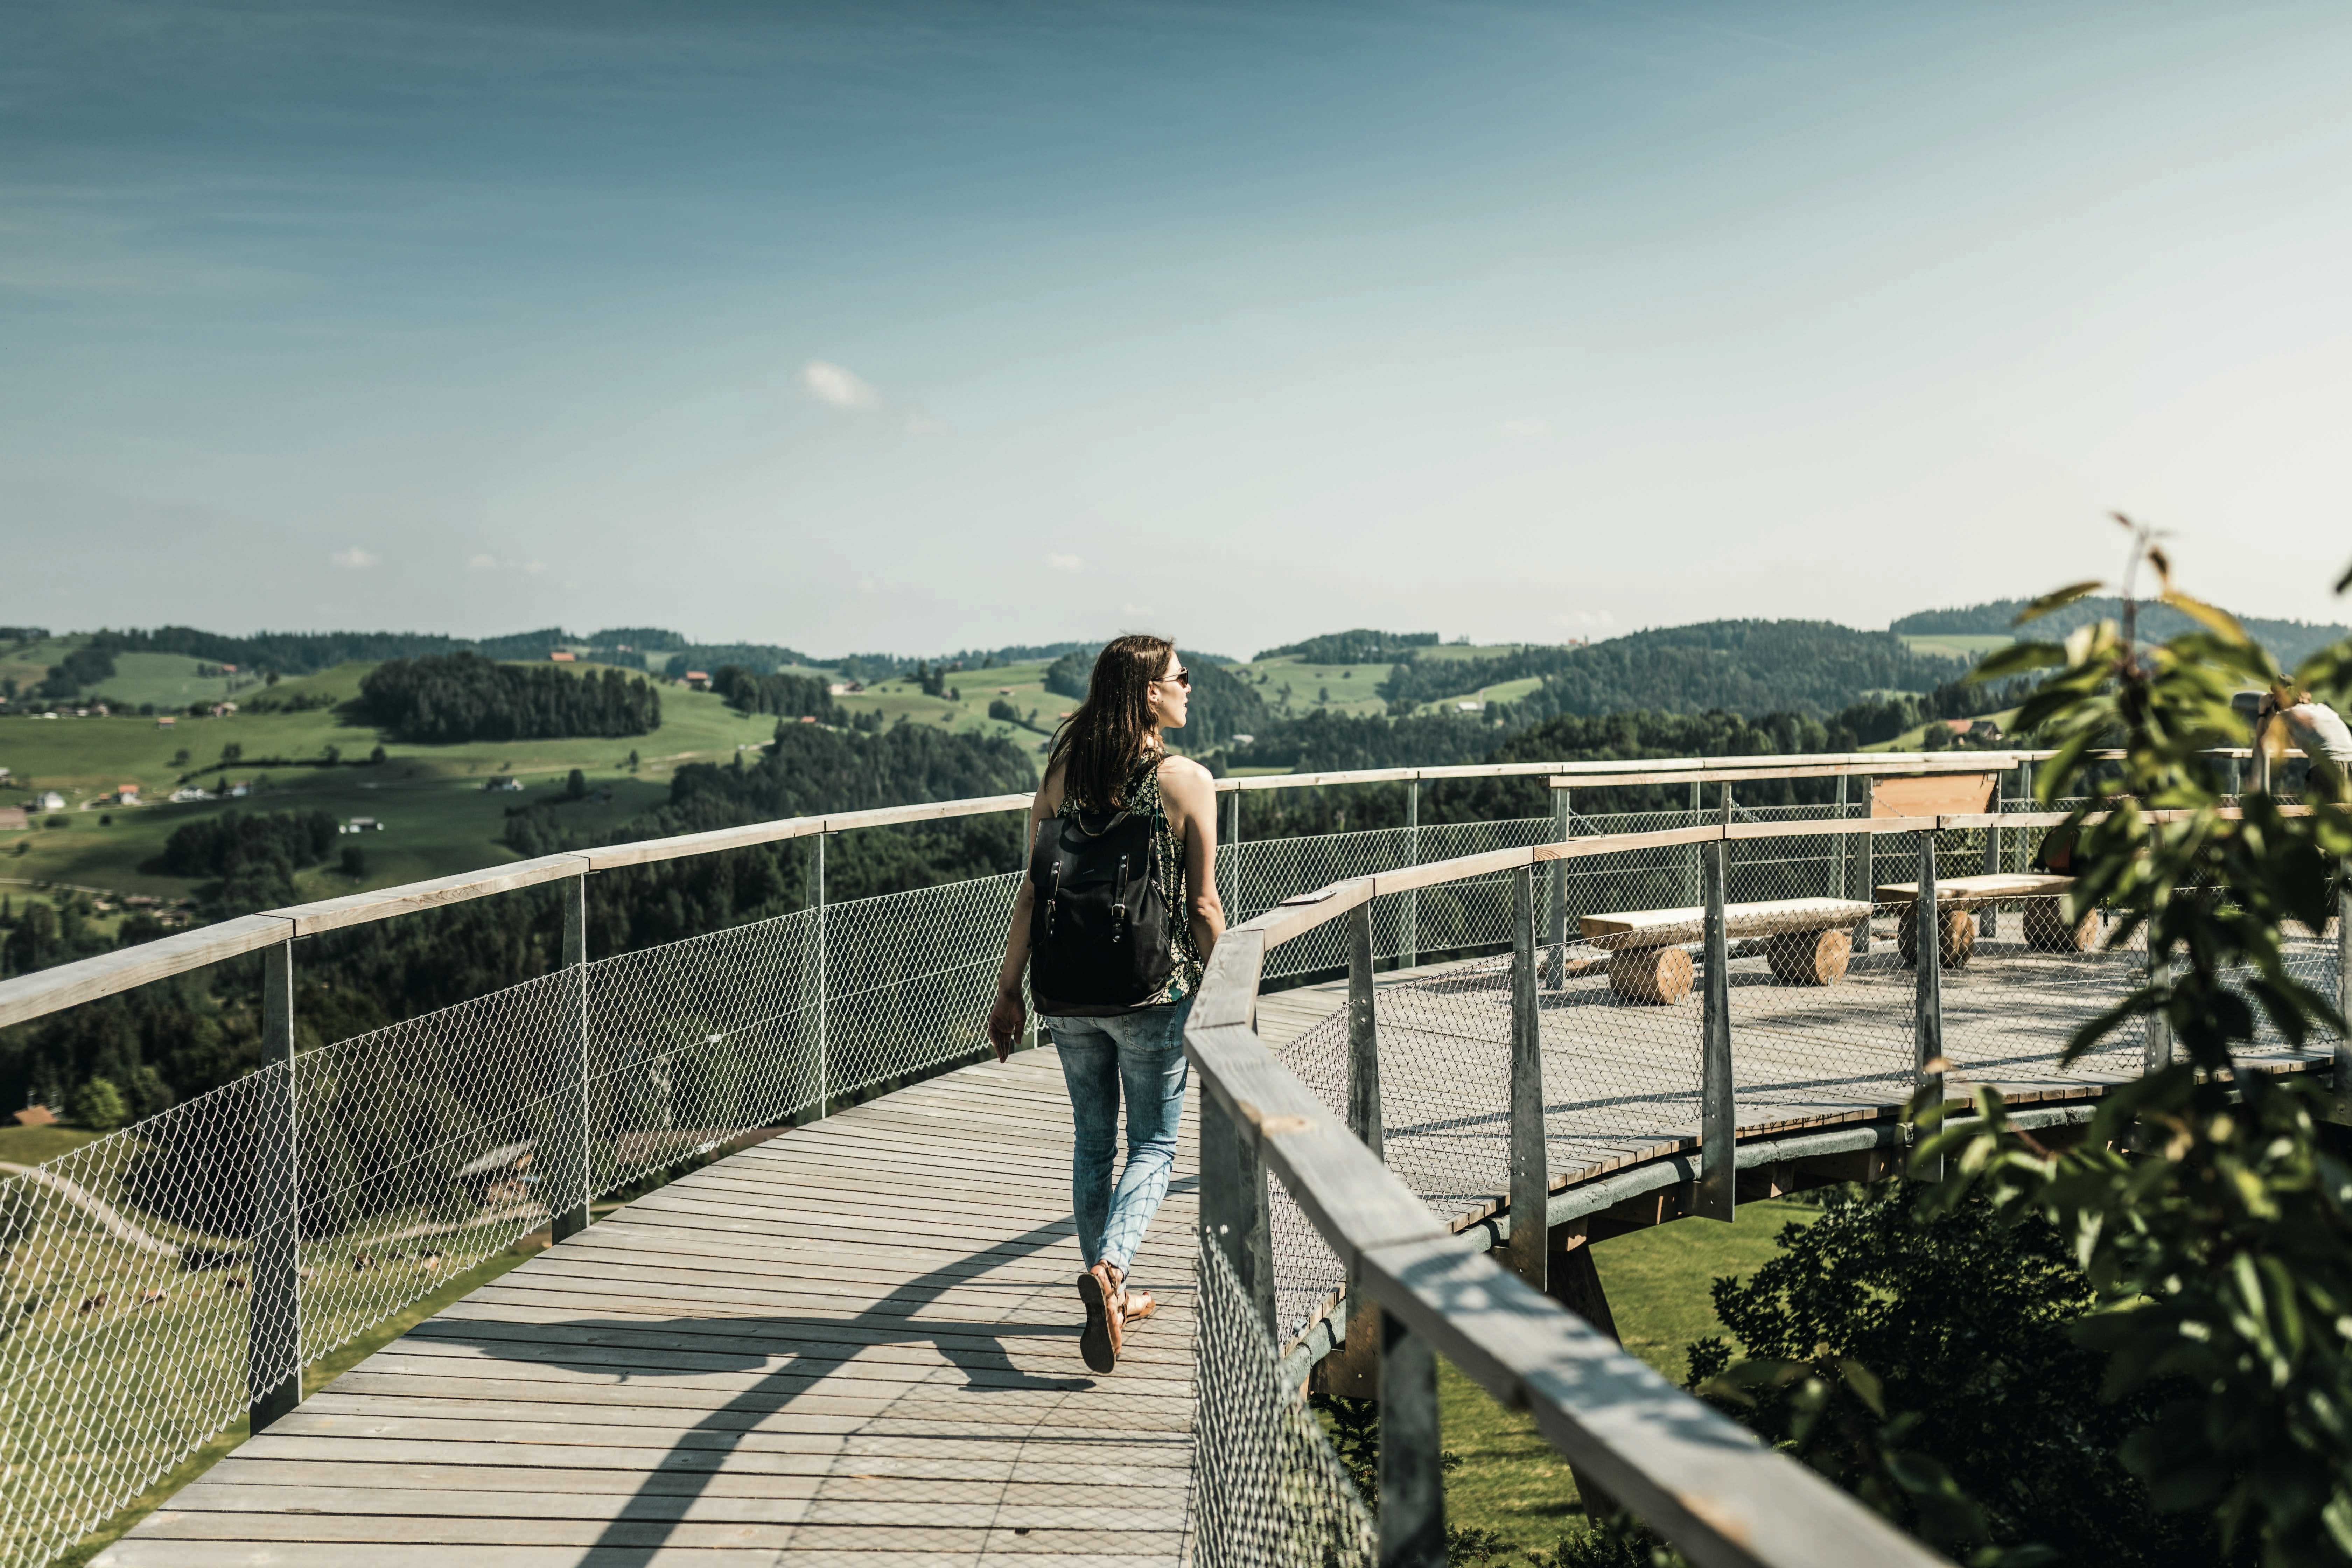 Admission to the Treetop Walkway Neckertal